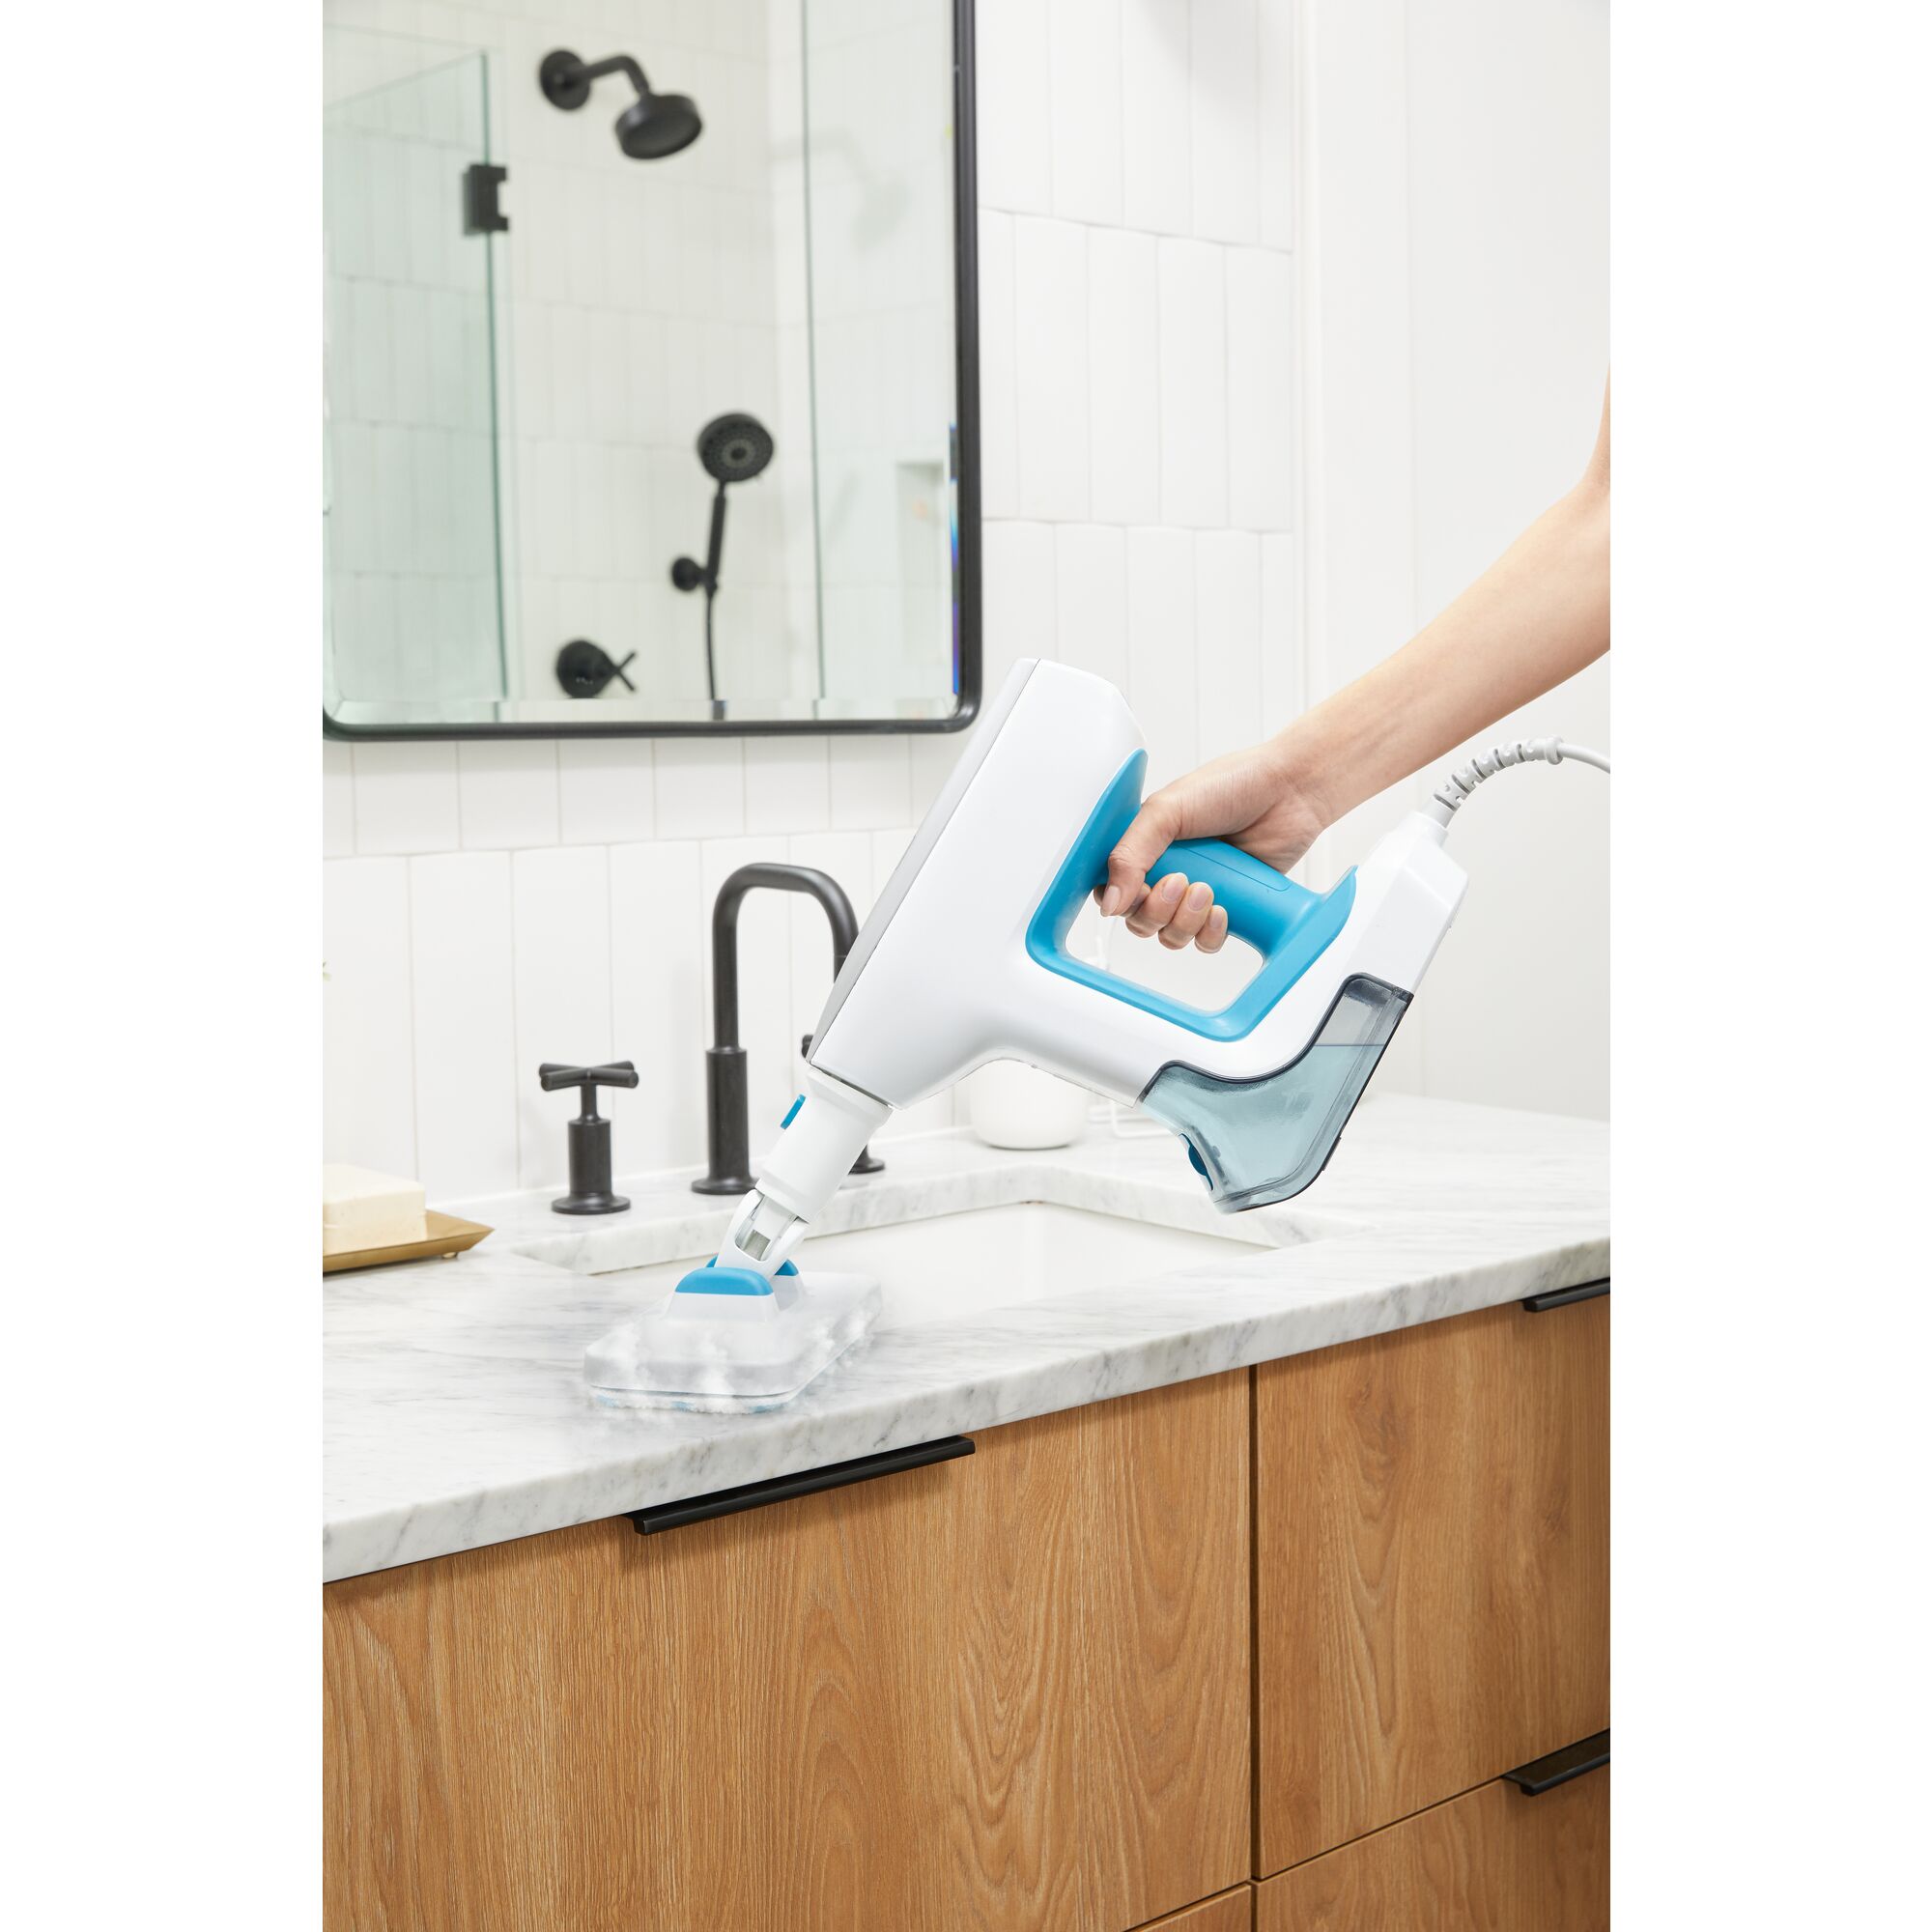 Woman cleaning bathroom countertop with steam mop accessory